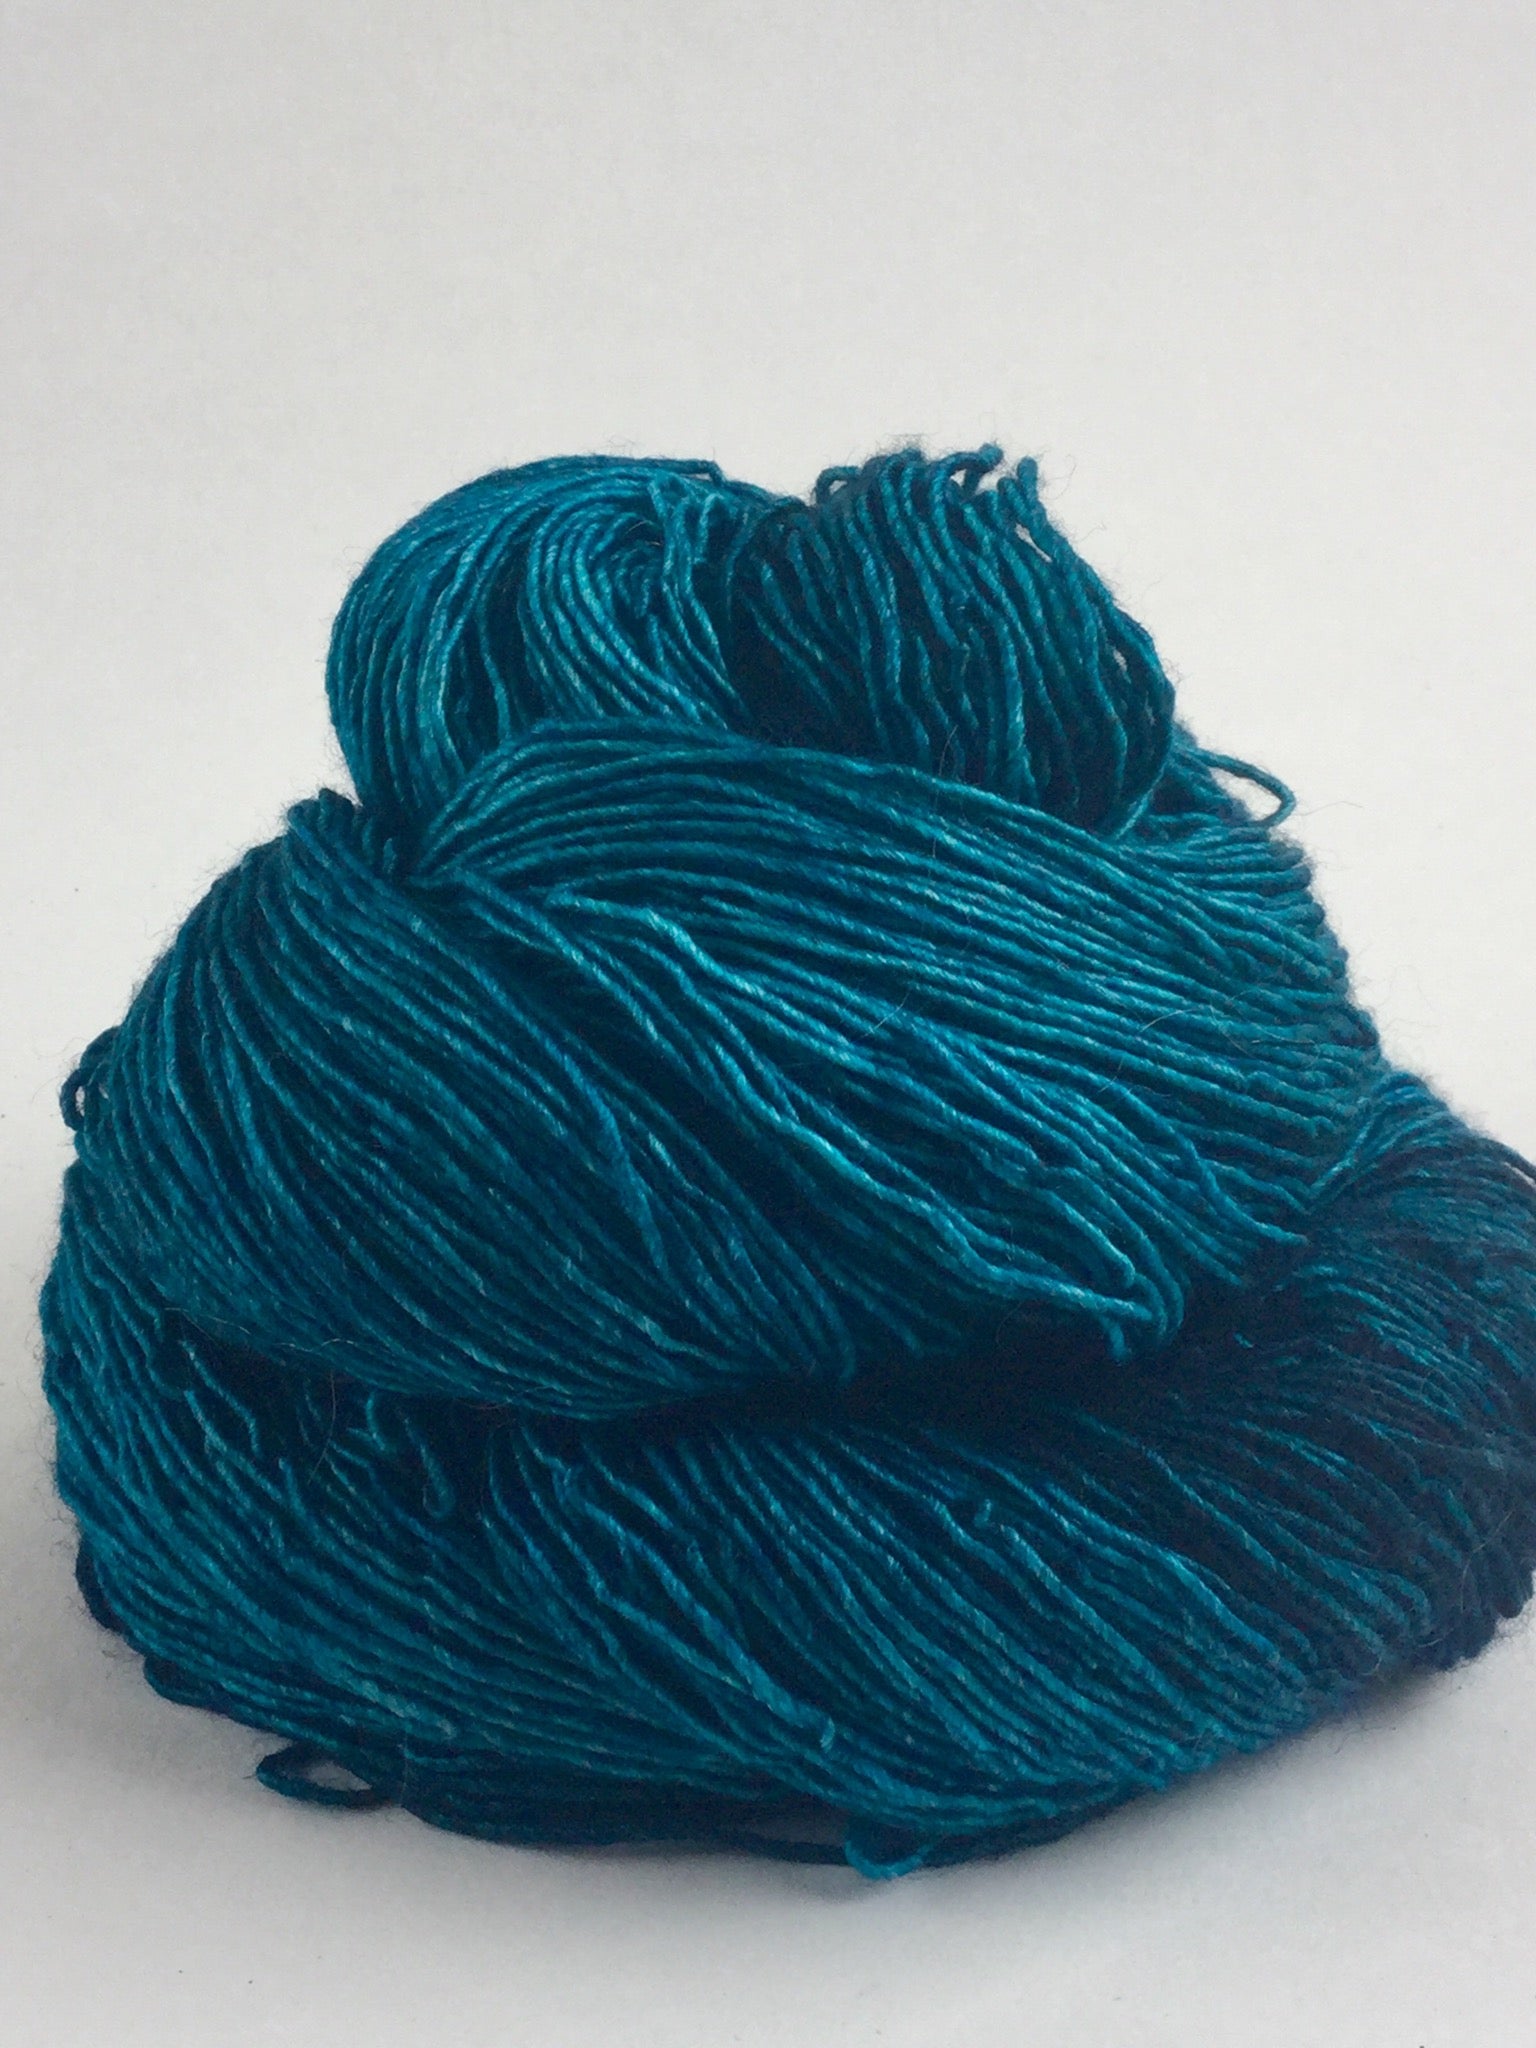 Tide - River Silk and Merino from Tributary Yarns